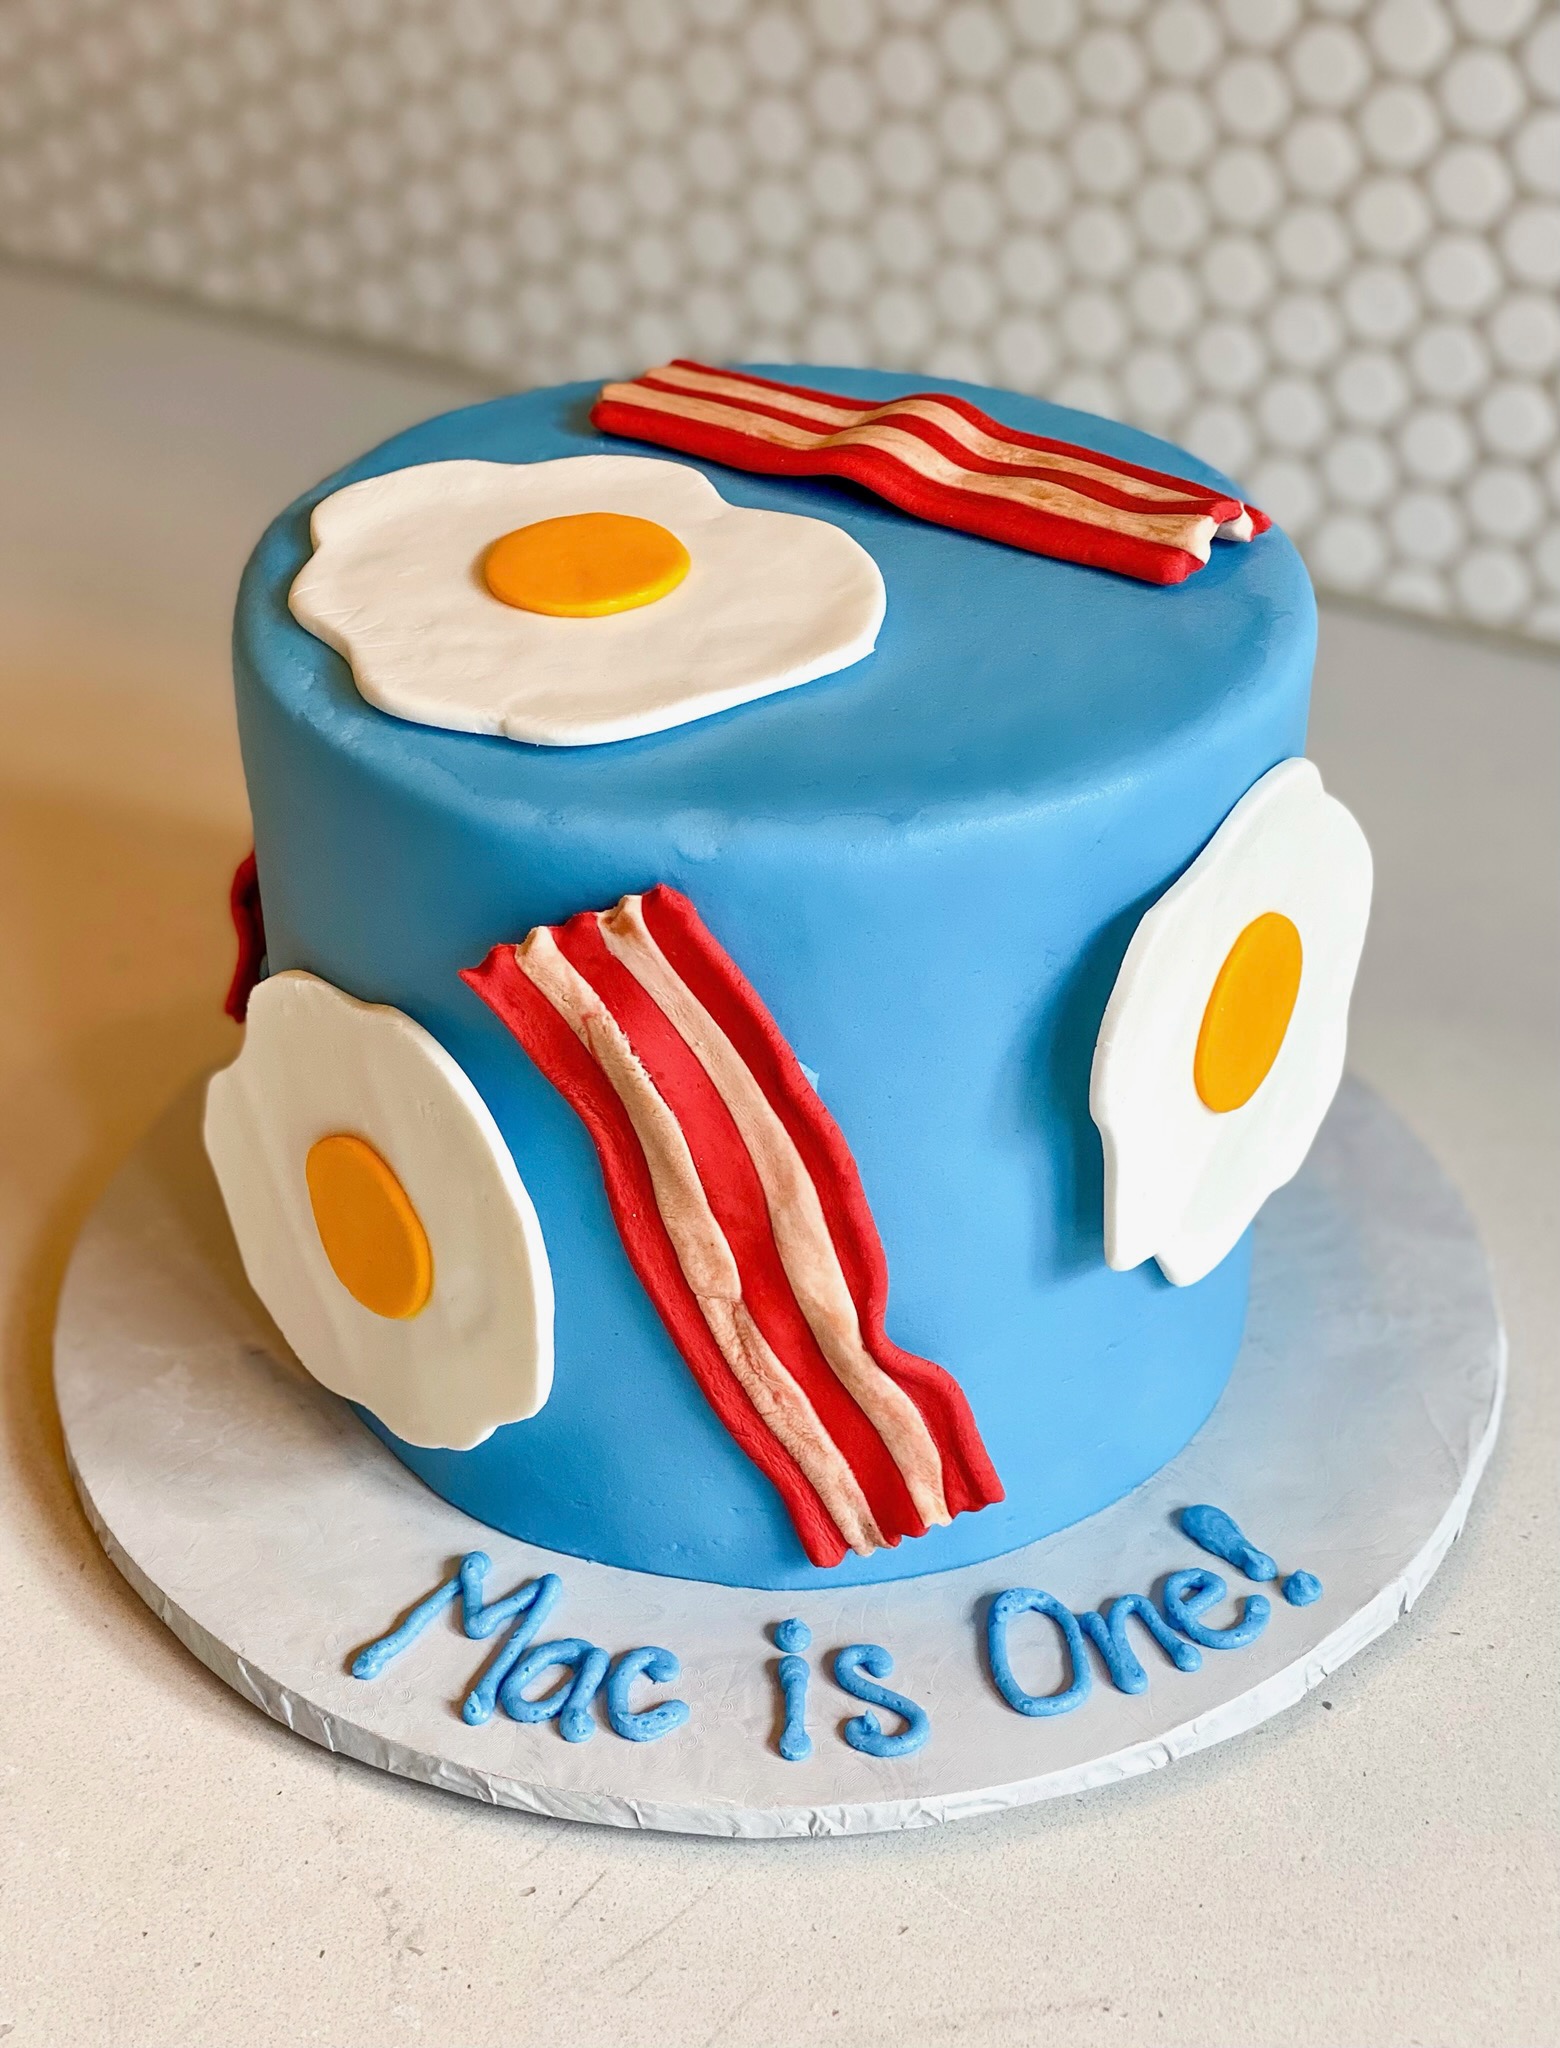 Round button blue cake with bacon and fried eggs decorations made from fondant. Cake board has piped icing with the message, Mac is one!